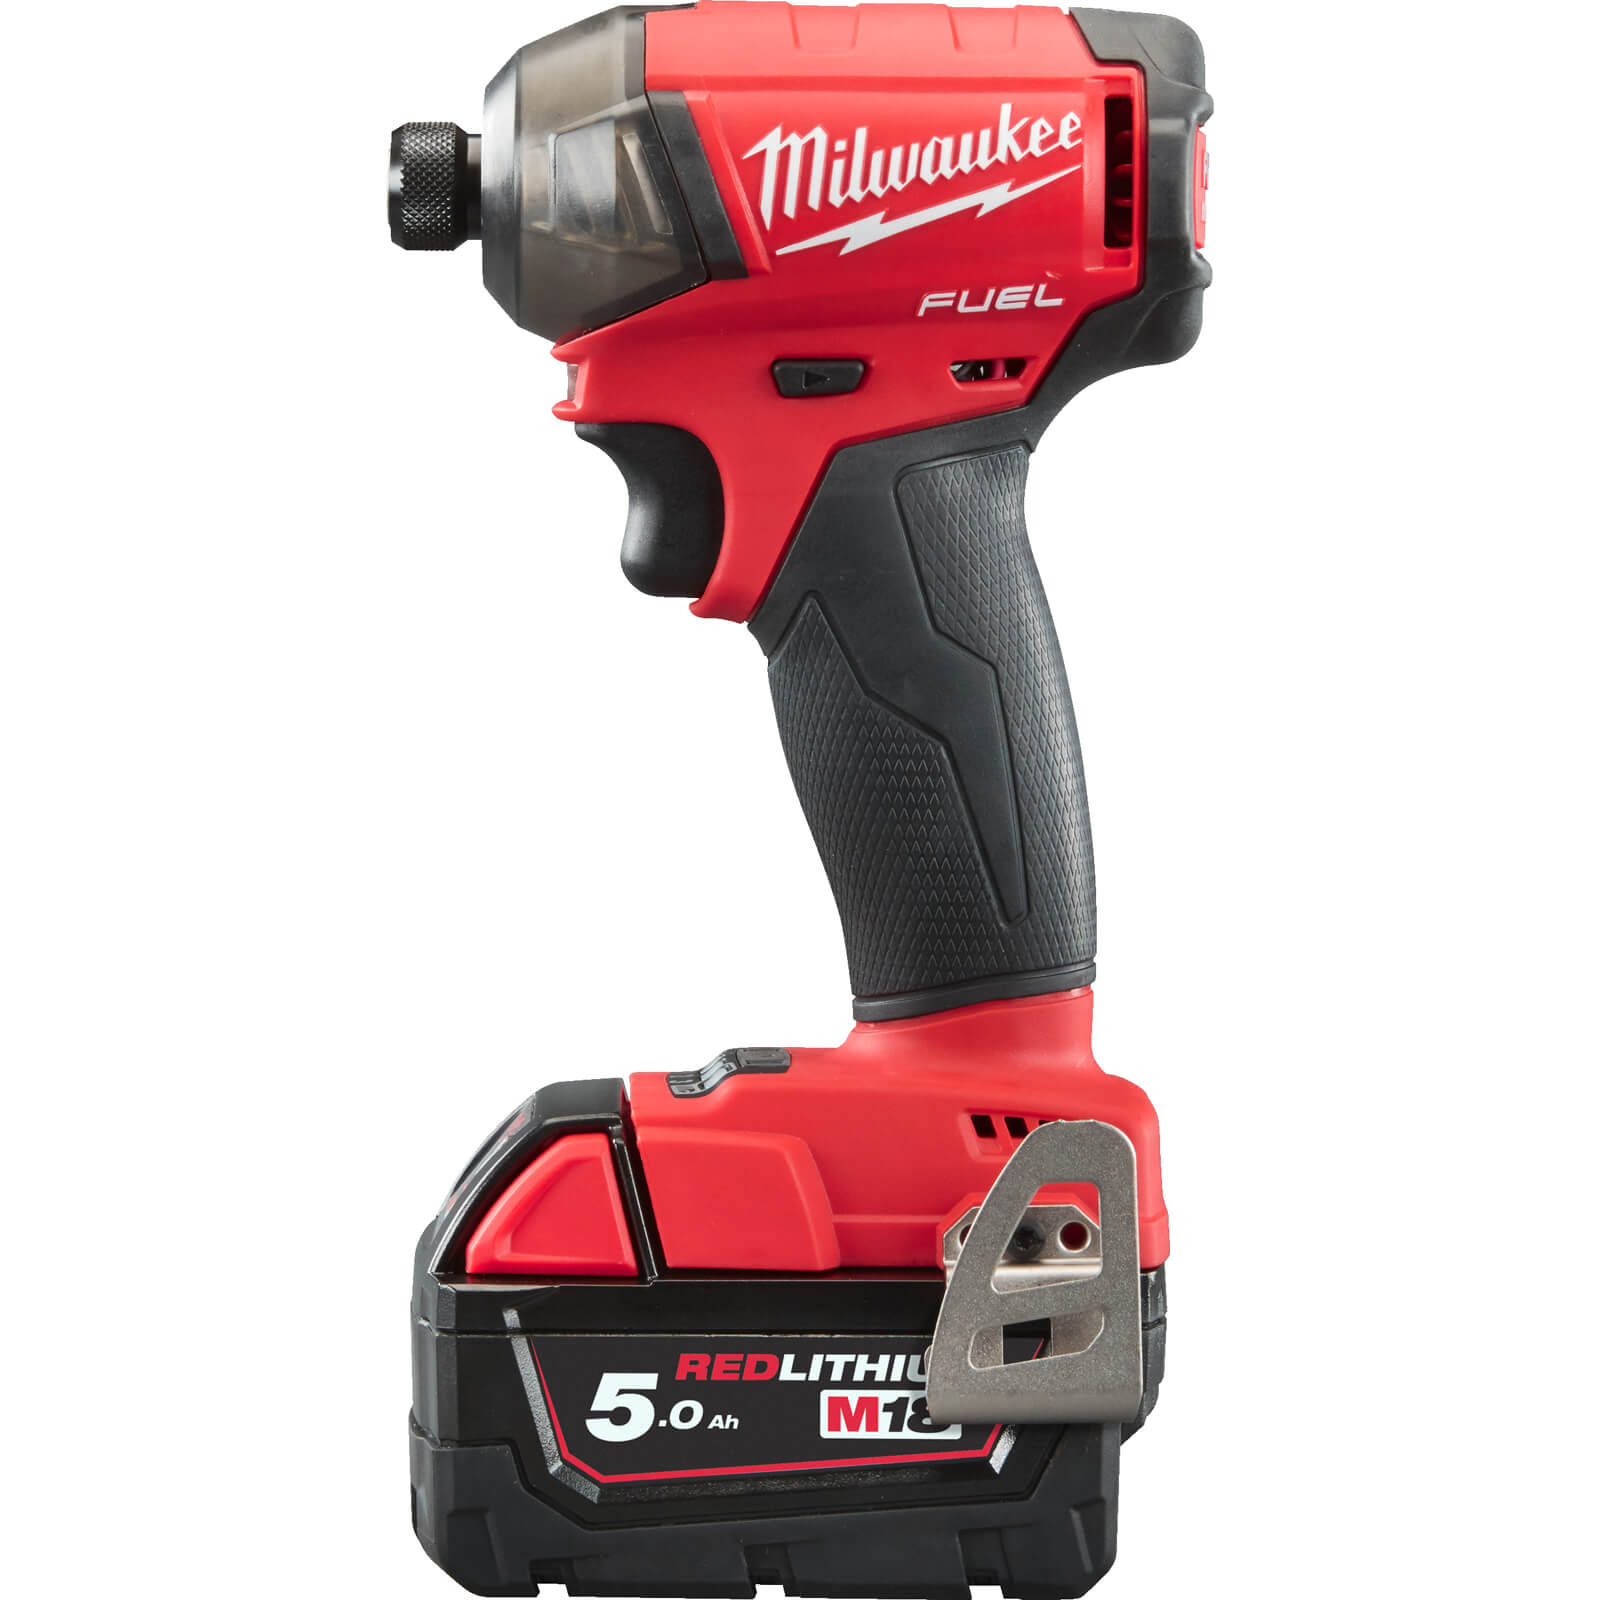 Image of Milwaukee M18 FQID Fuel 18v Cordless Brushless Surge Hydraulic Impact Driver 2 x 5ah Li-ion Charger Case